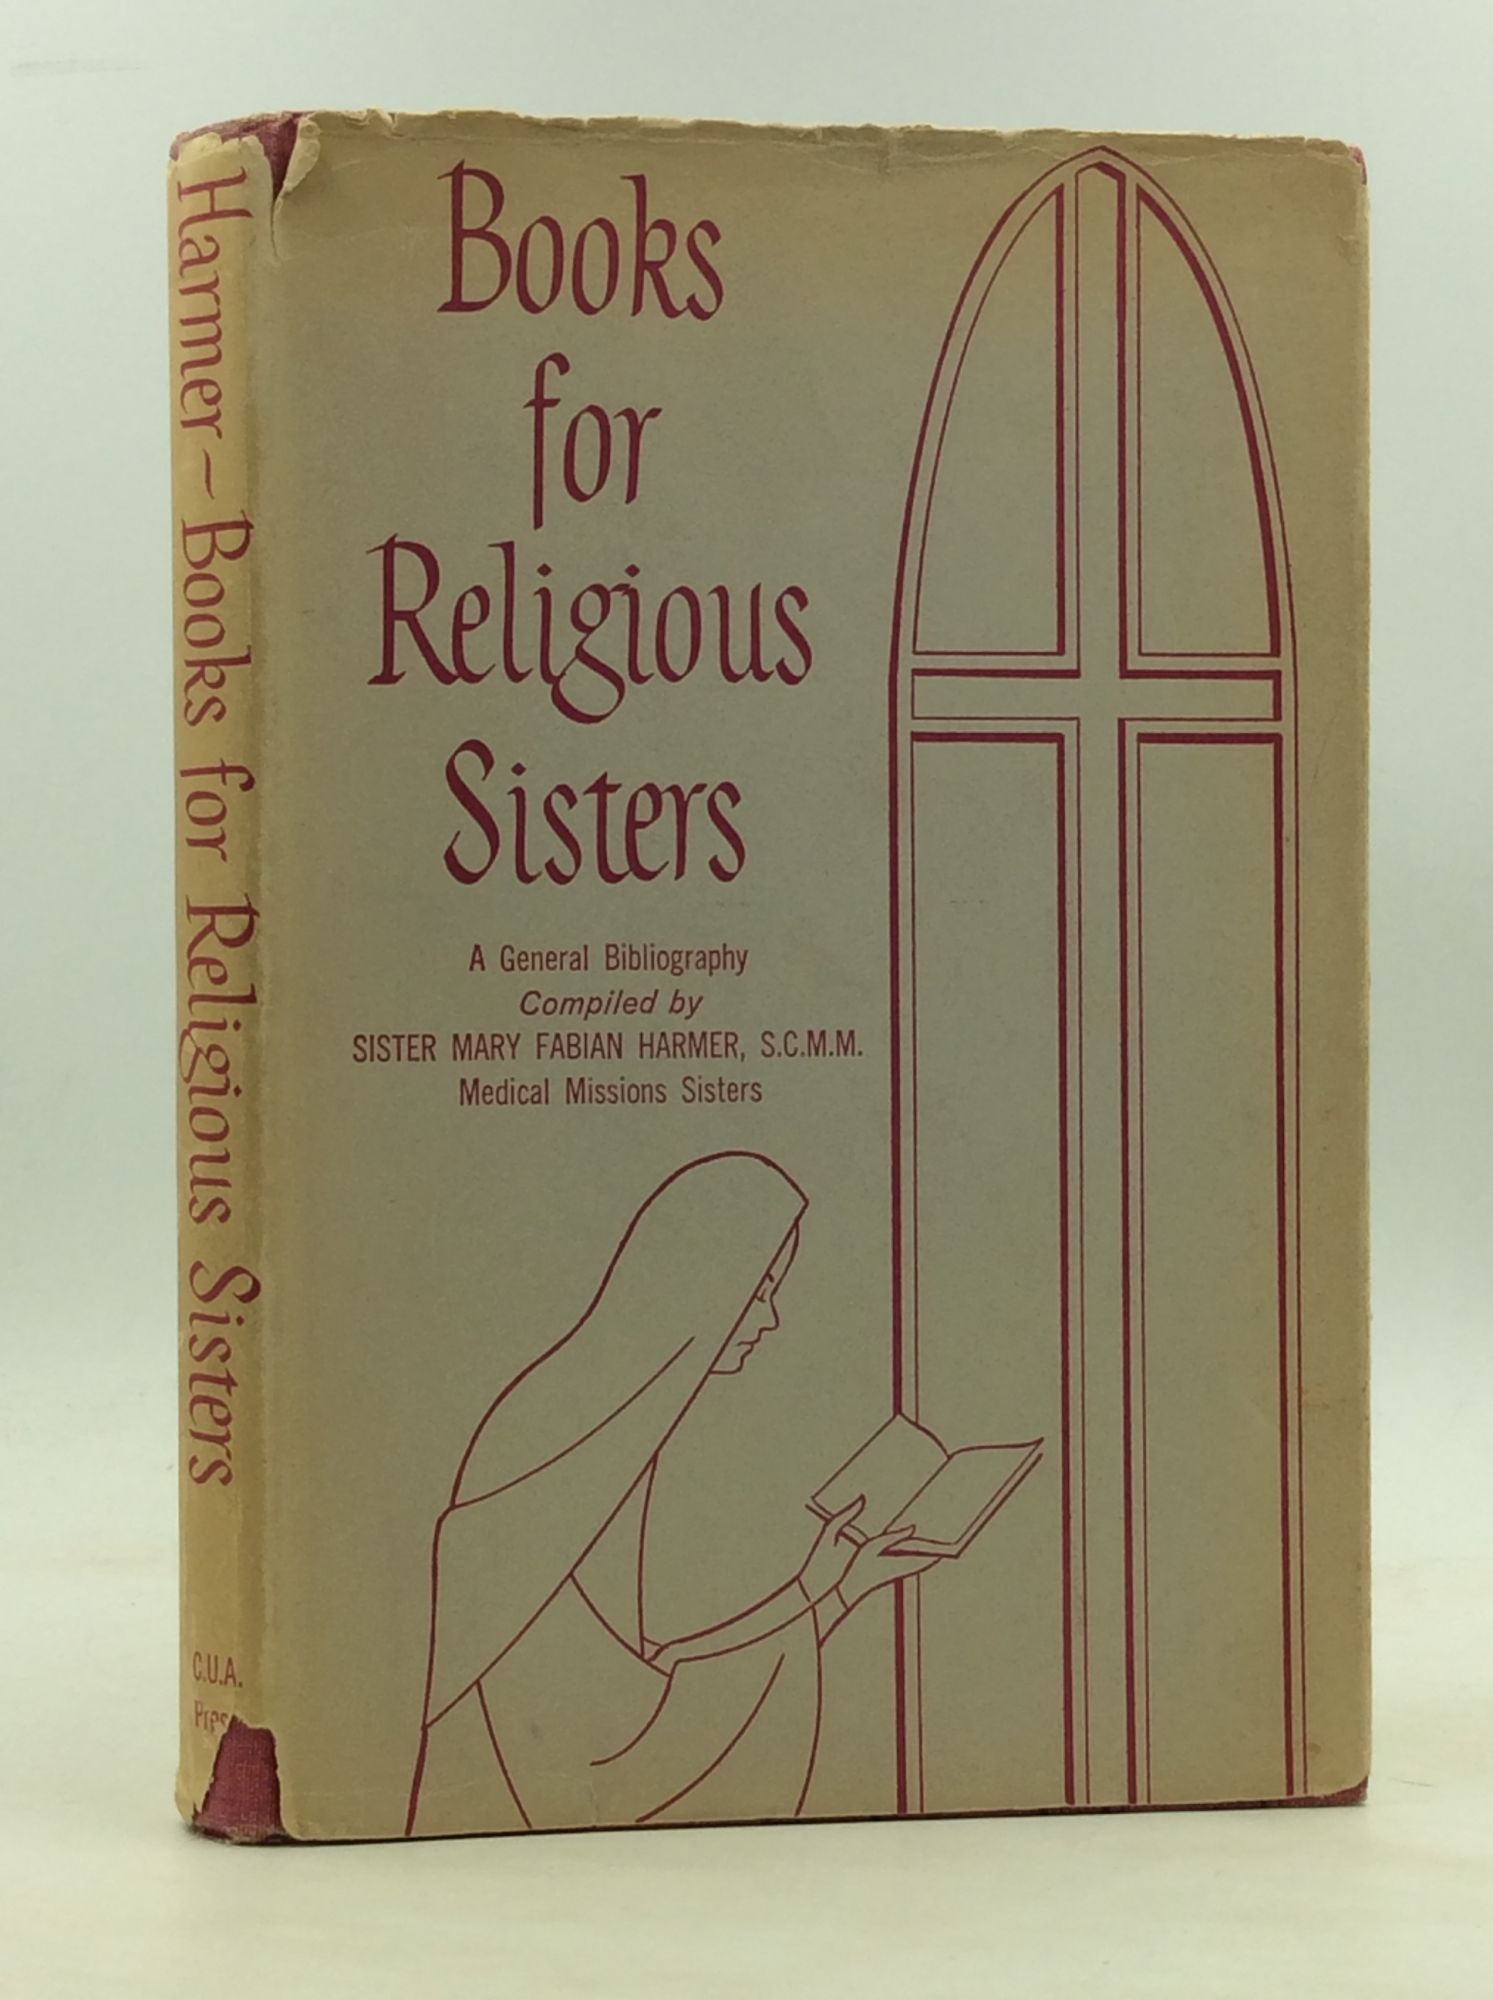 Sister Mary Fabian Harmer - Book for Religious Sisters: A General Bibliography